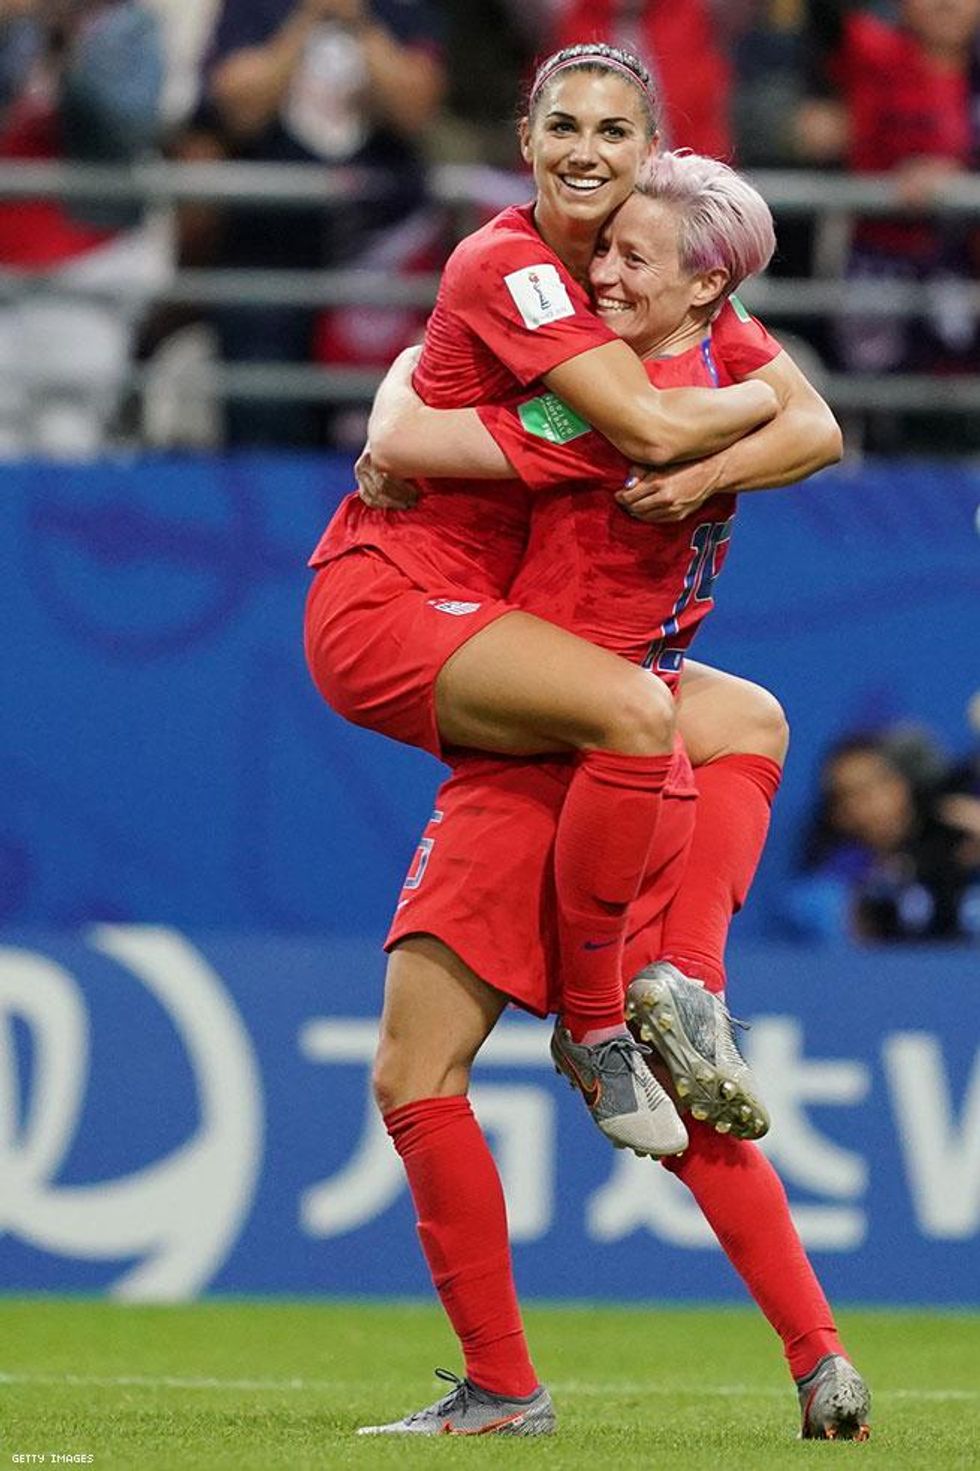 Alex Morgan and Megan Rapinoe hug it out after one of the many goals scored.